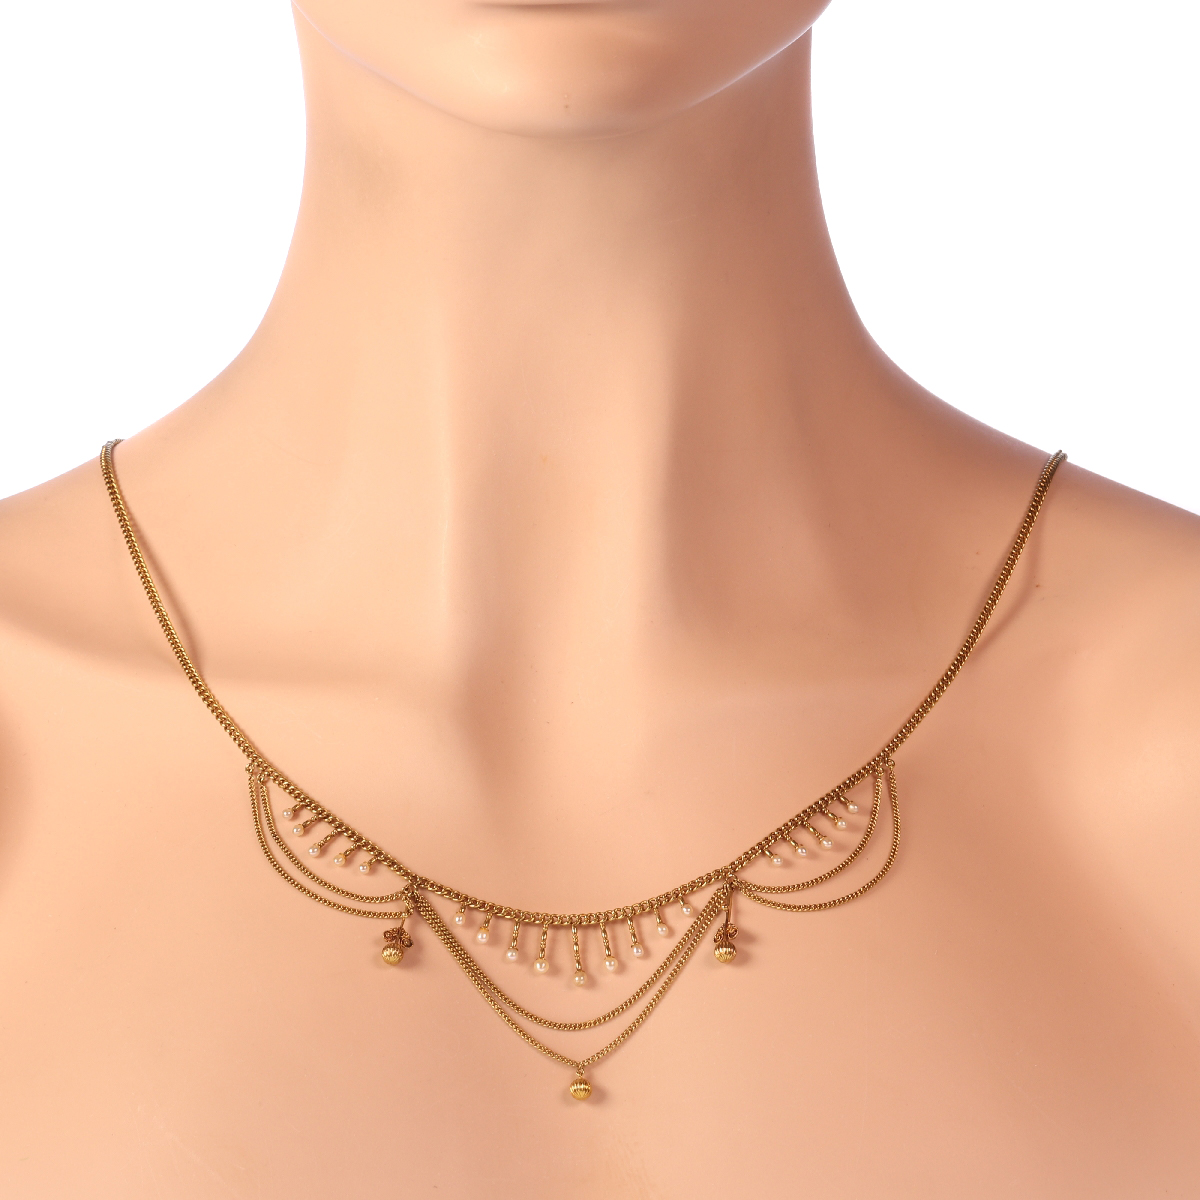 Antique gold bow necklace with natural seed pearls